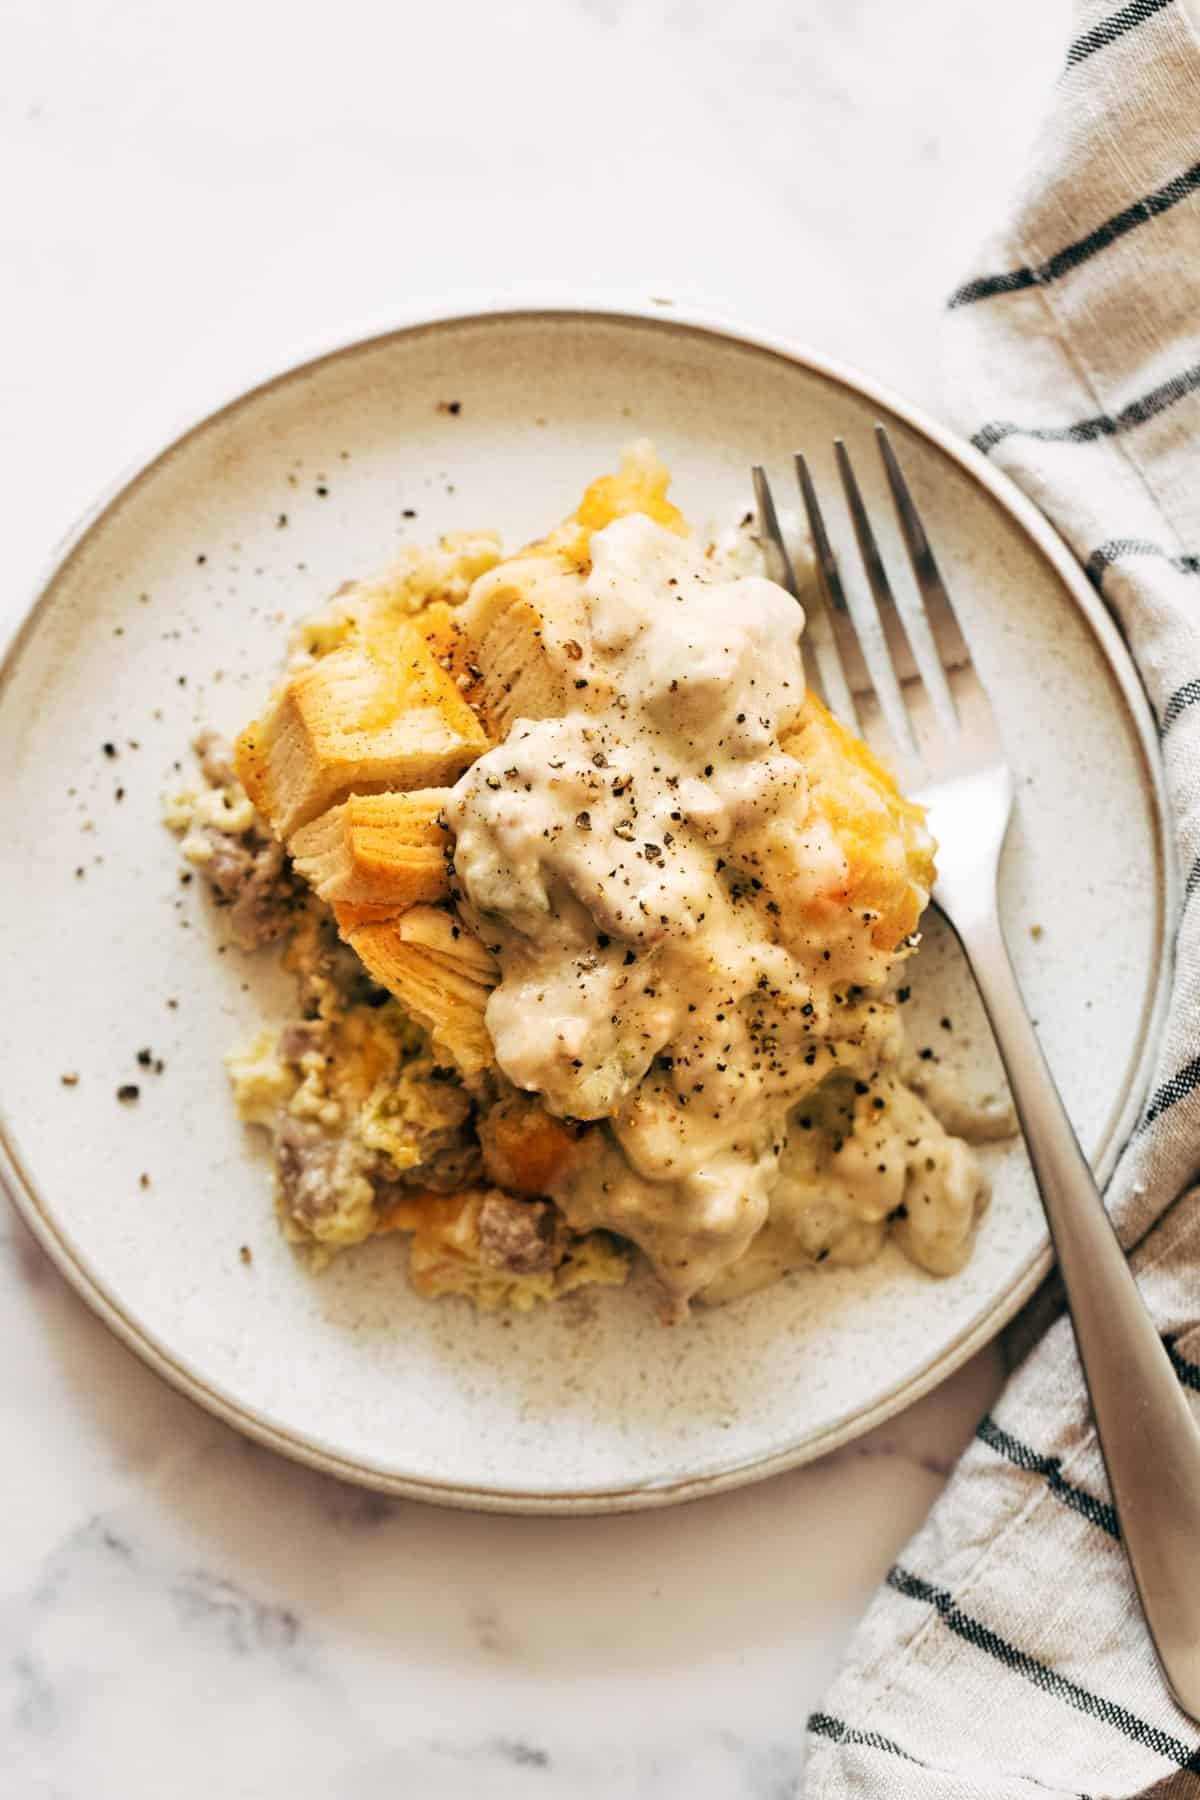 Biscuits and gravy egg bake on a plate.